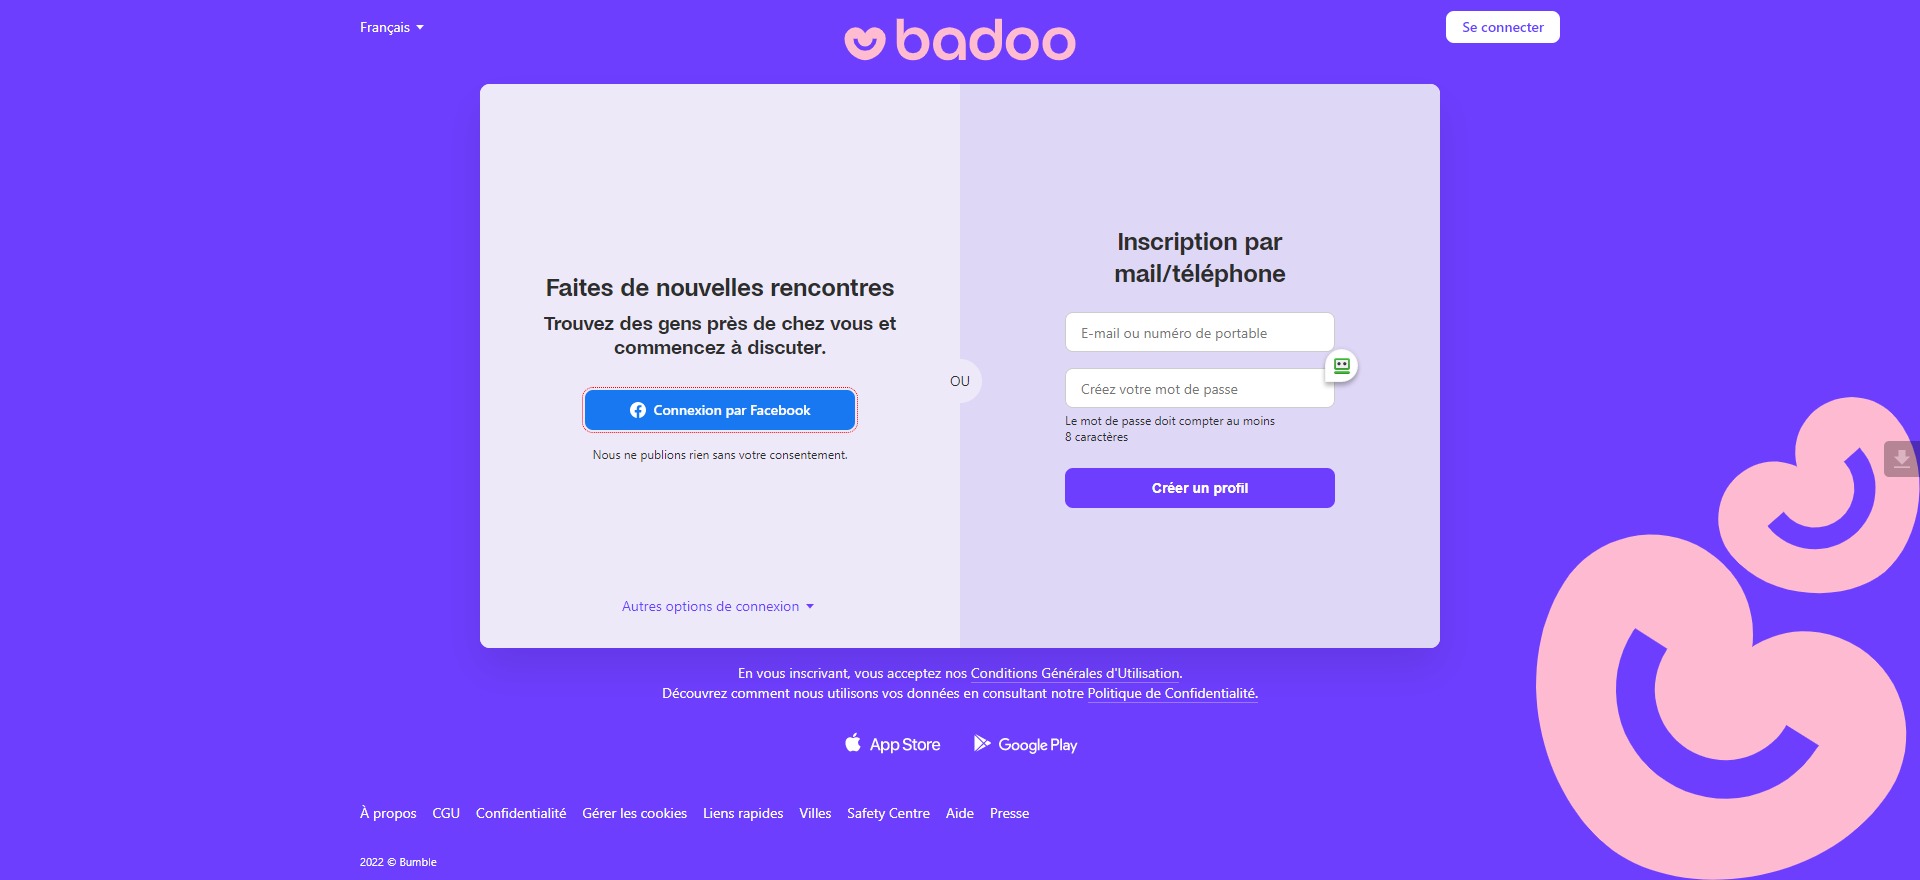 Badoo: My opinion and everything you need to know